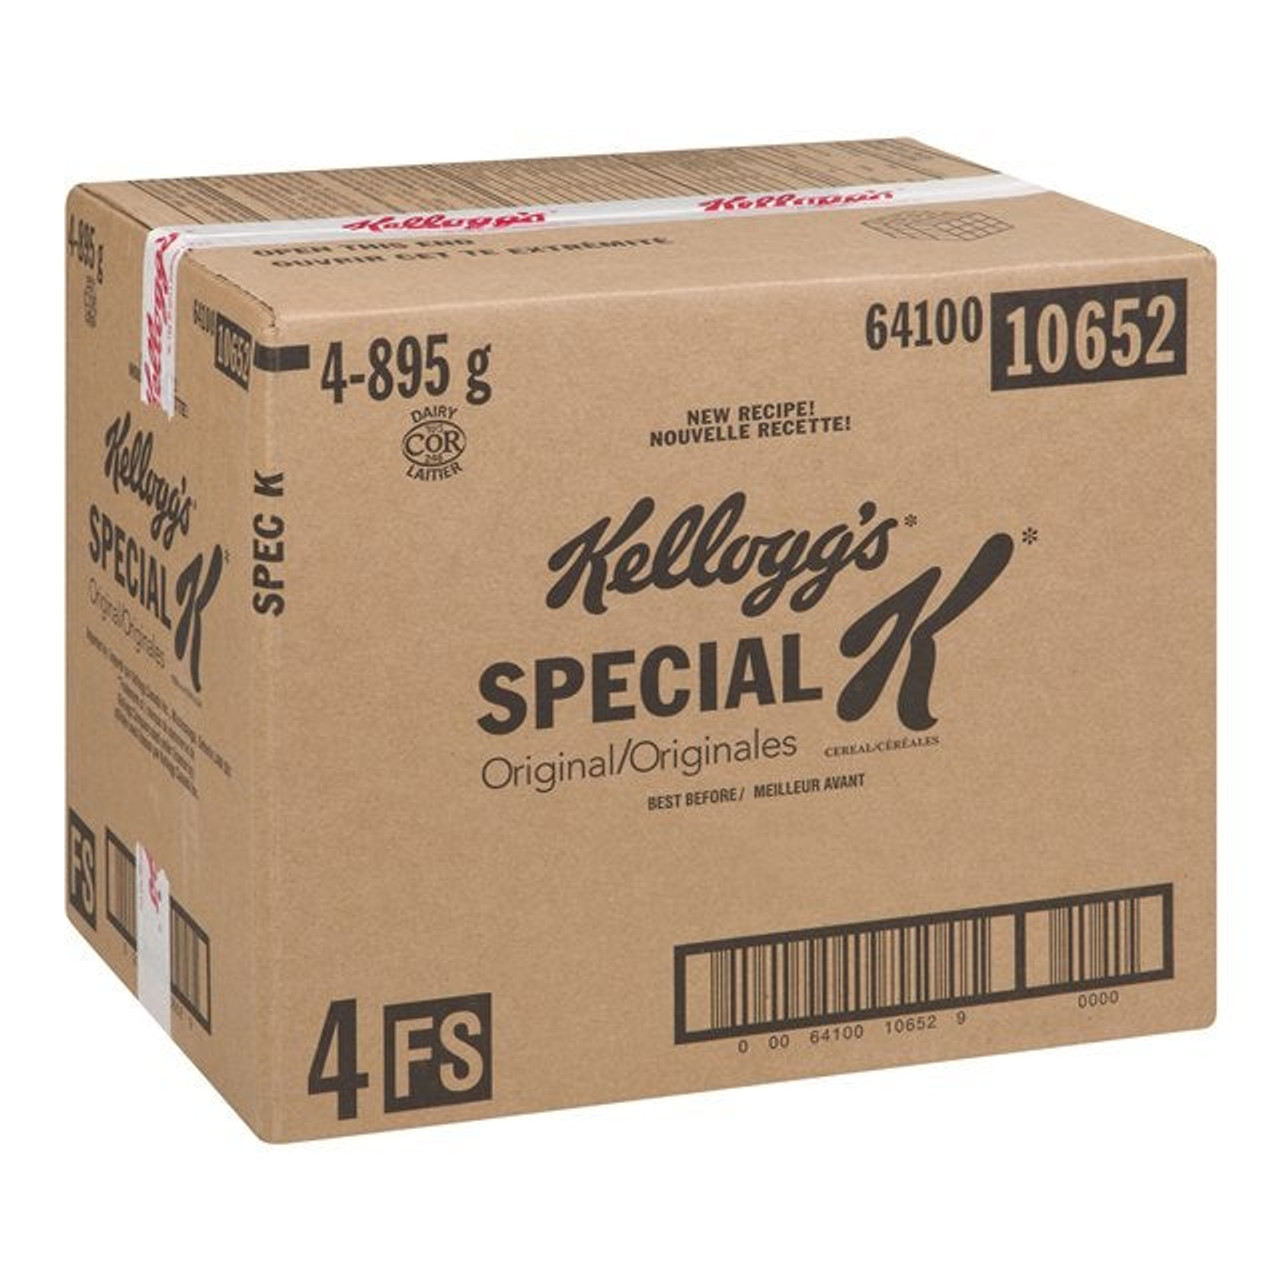 Kellogg's Special K Cereal, Pouch | 895G/Unit, 4 Units/Case